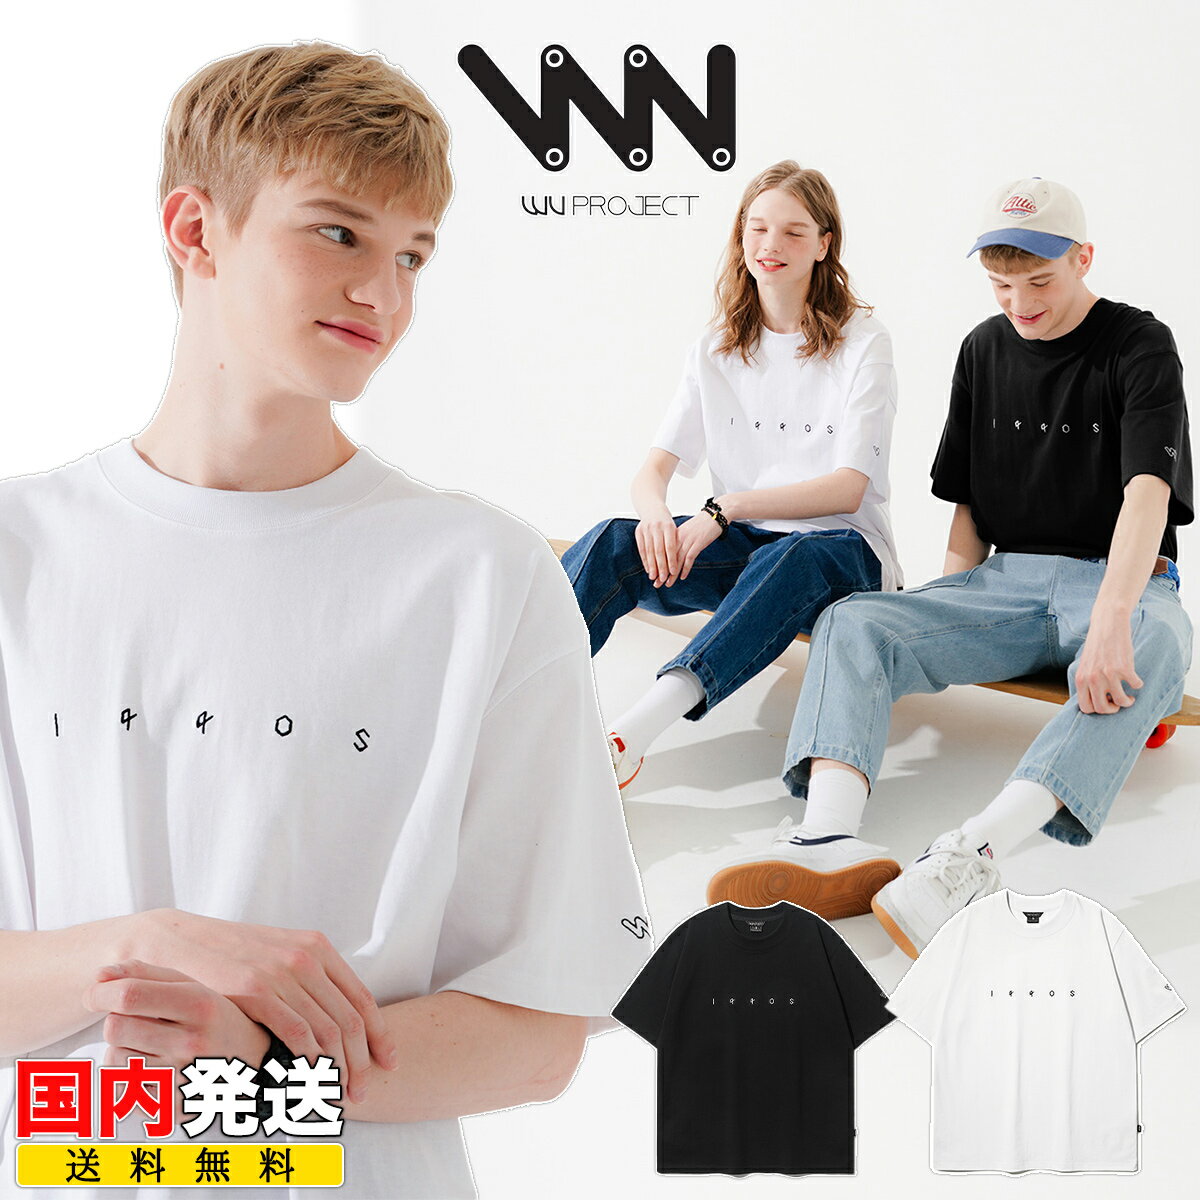 WV PROJECT TVc WV vWFNg Pixie Short-sleeve I[o[TCY  S jZbNX ؍ K-POP |\l AChp Ki Y fB[X _u[uC MJST7583 [ߗ]